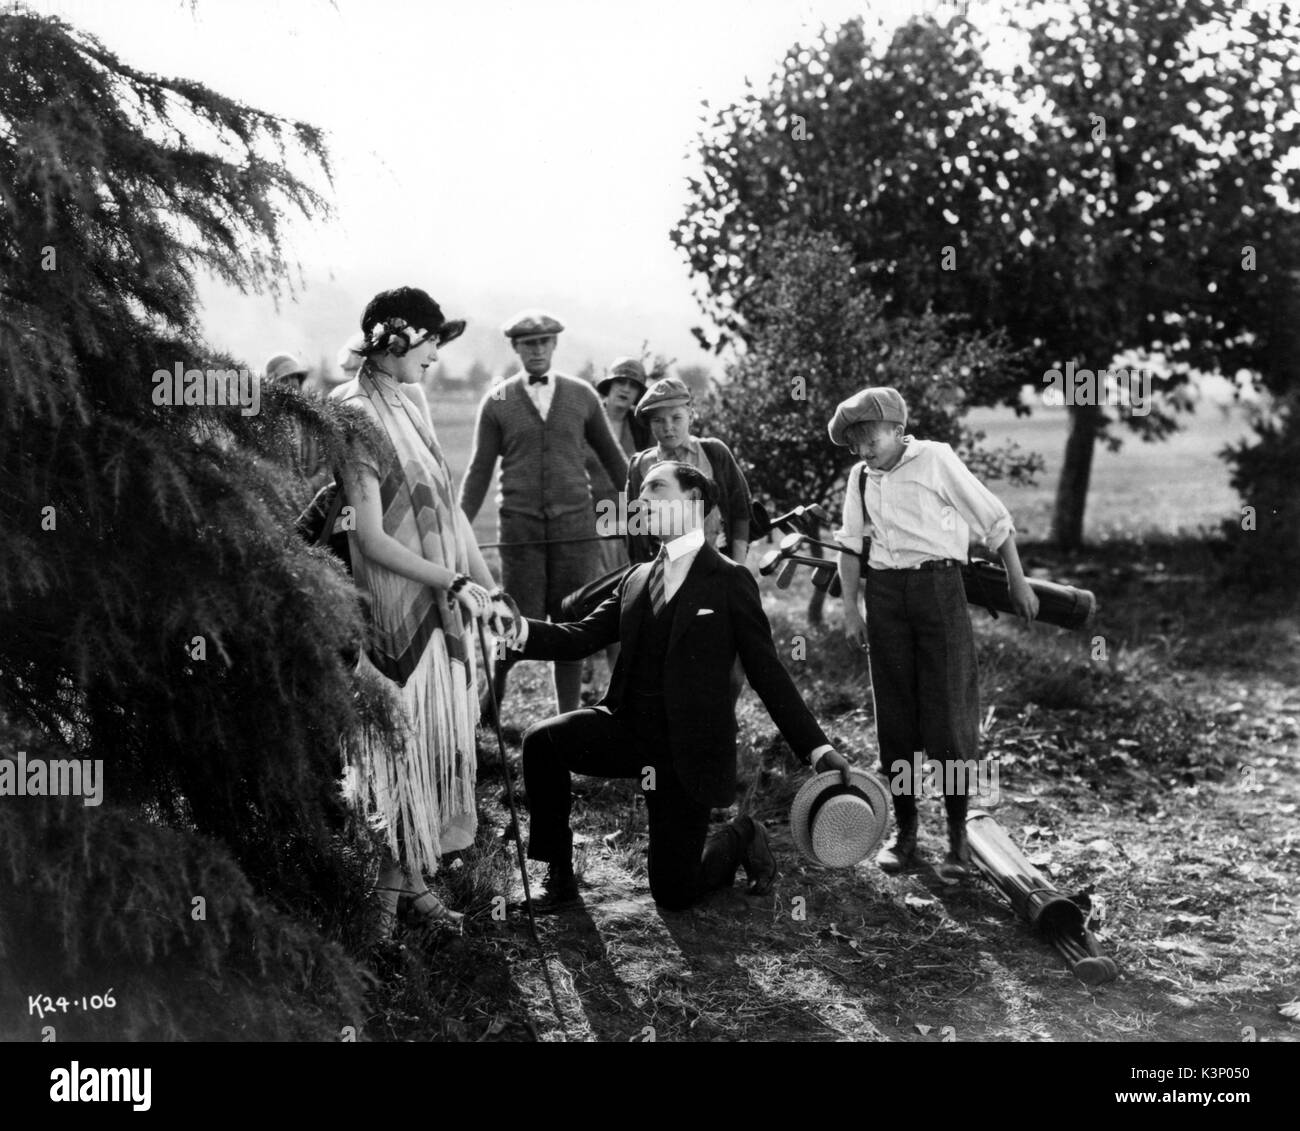 SEVEN CHANCES [US 1925] RUTH DWYER, BUSTER KEATON     Date: 1925 Stock Photo